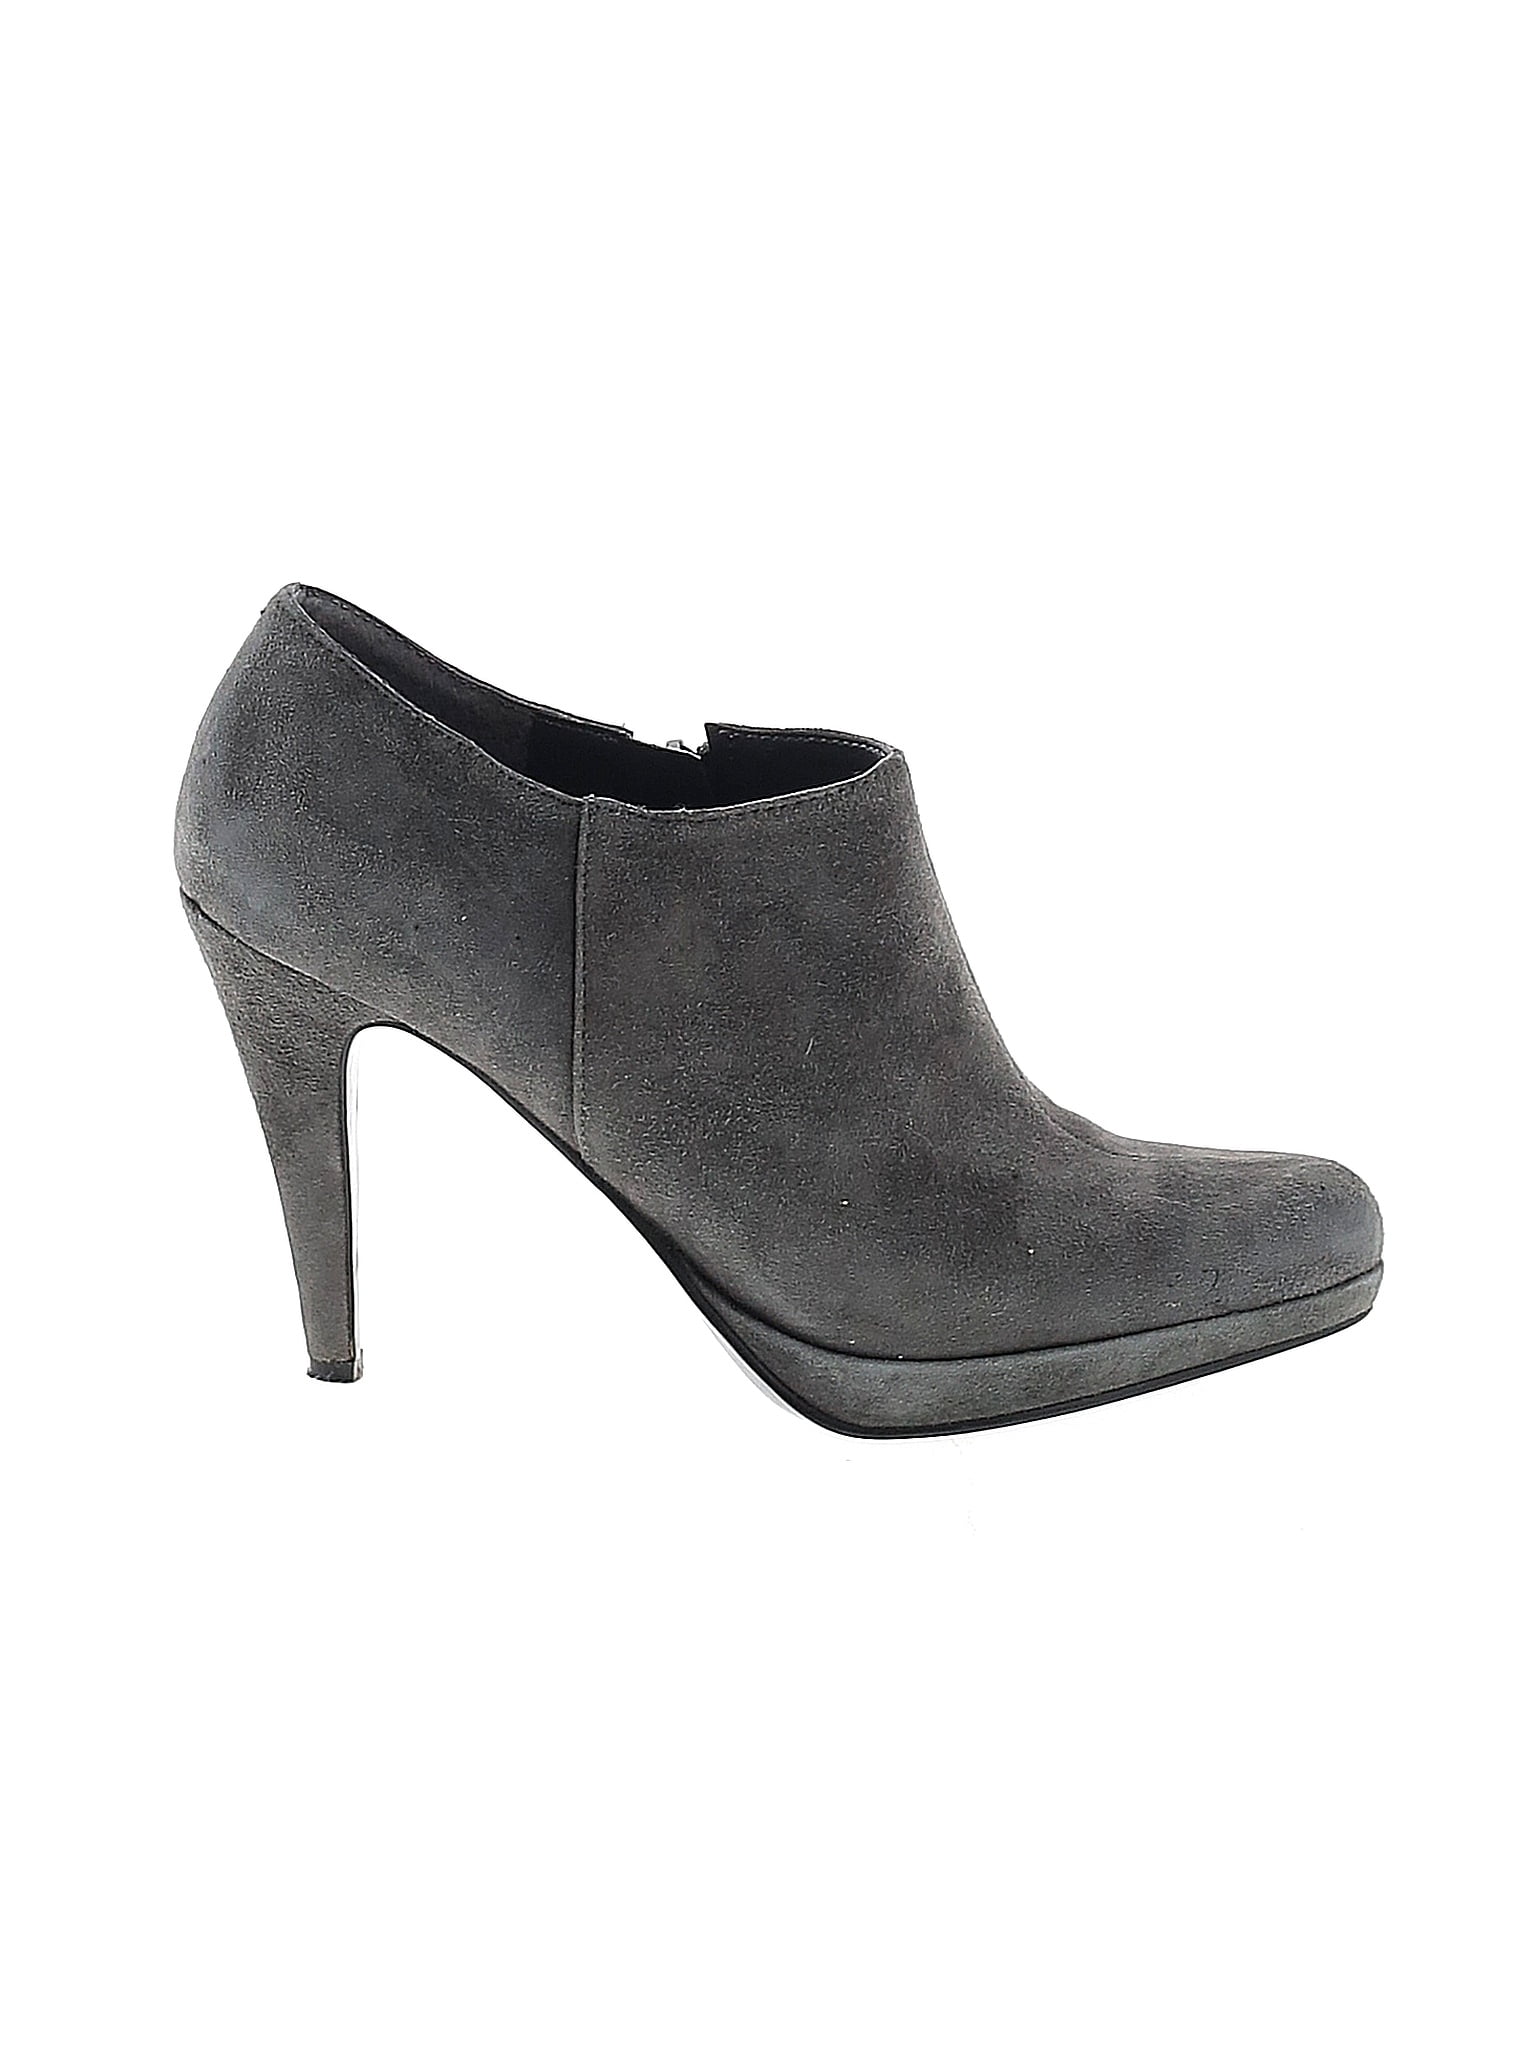 Bandolino Solid Gray Ankle Boots Size 6 - 65% off | thredUP